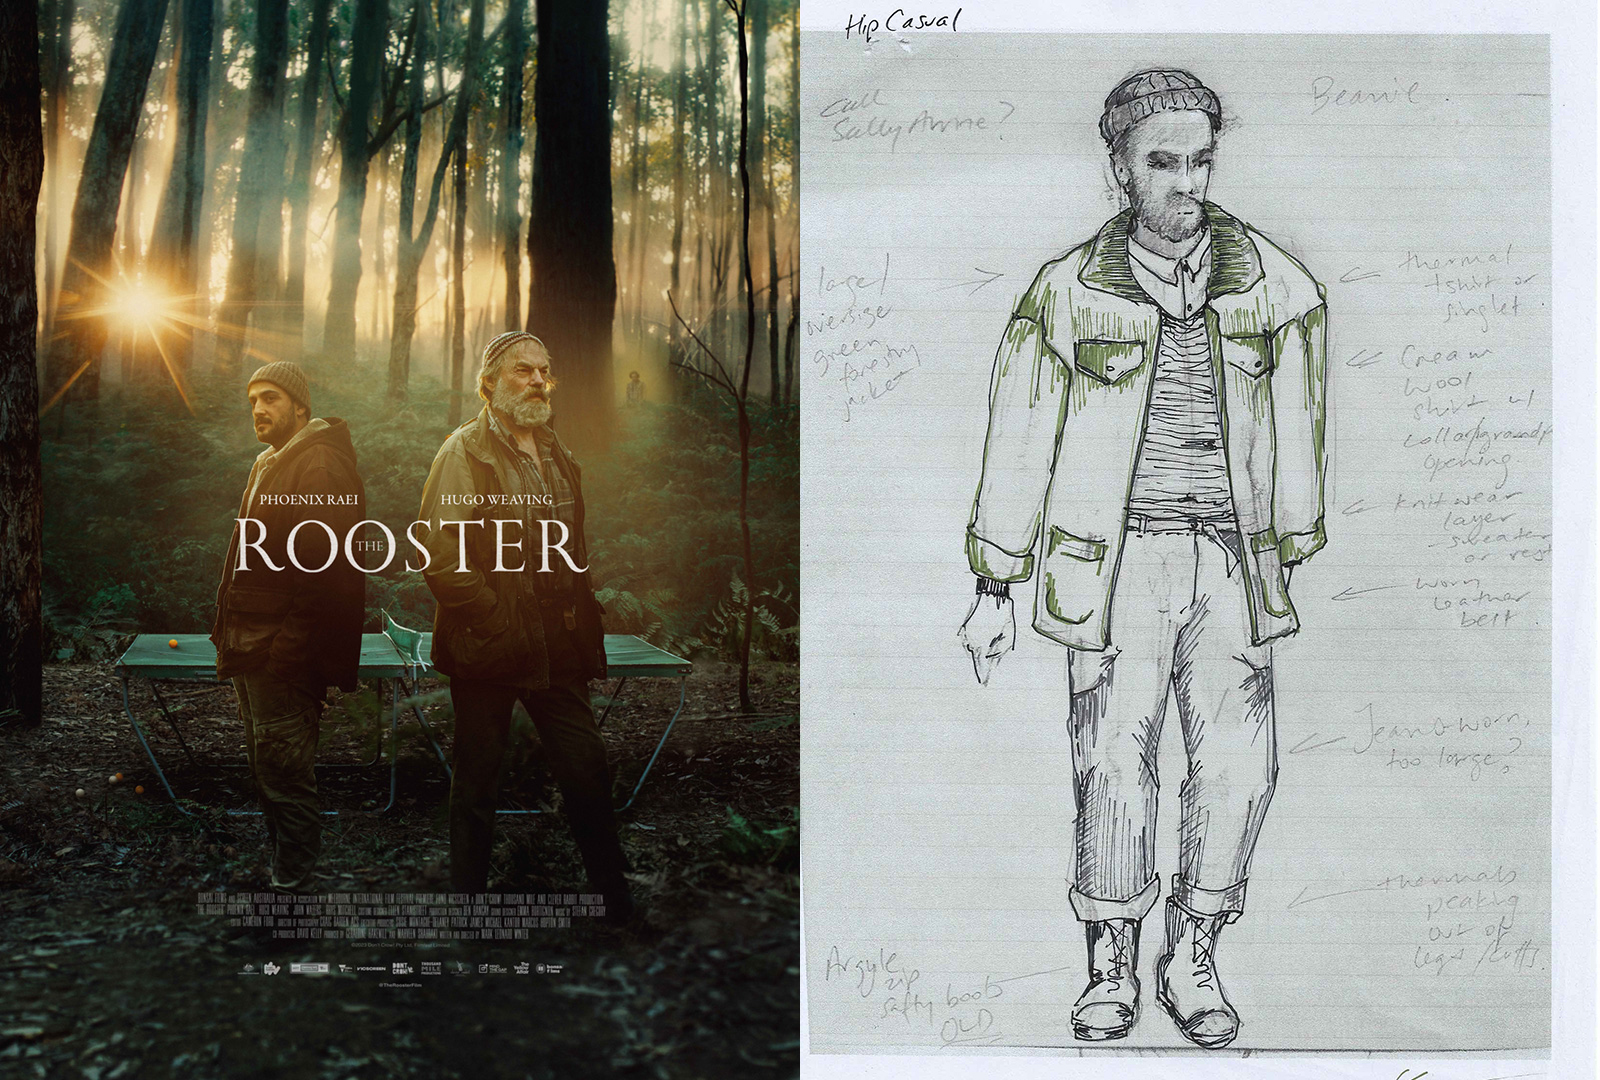 The Rooster movie poster and costume design sketch